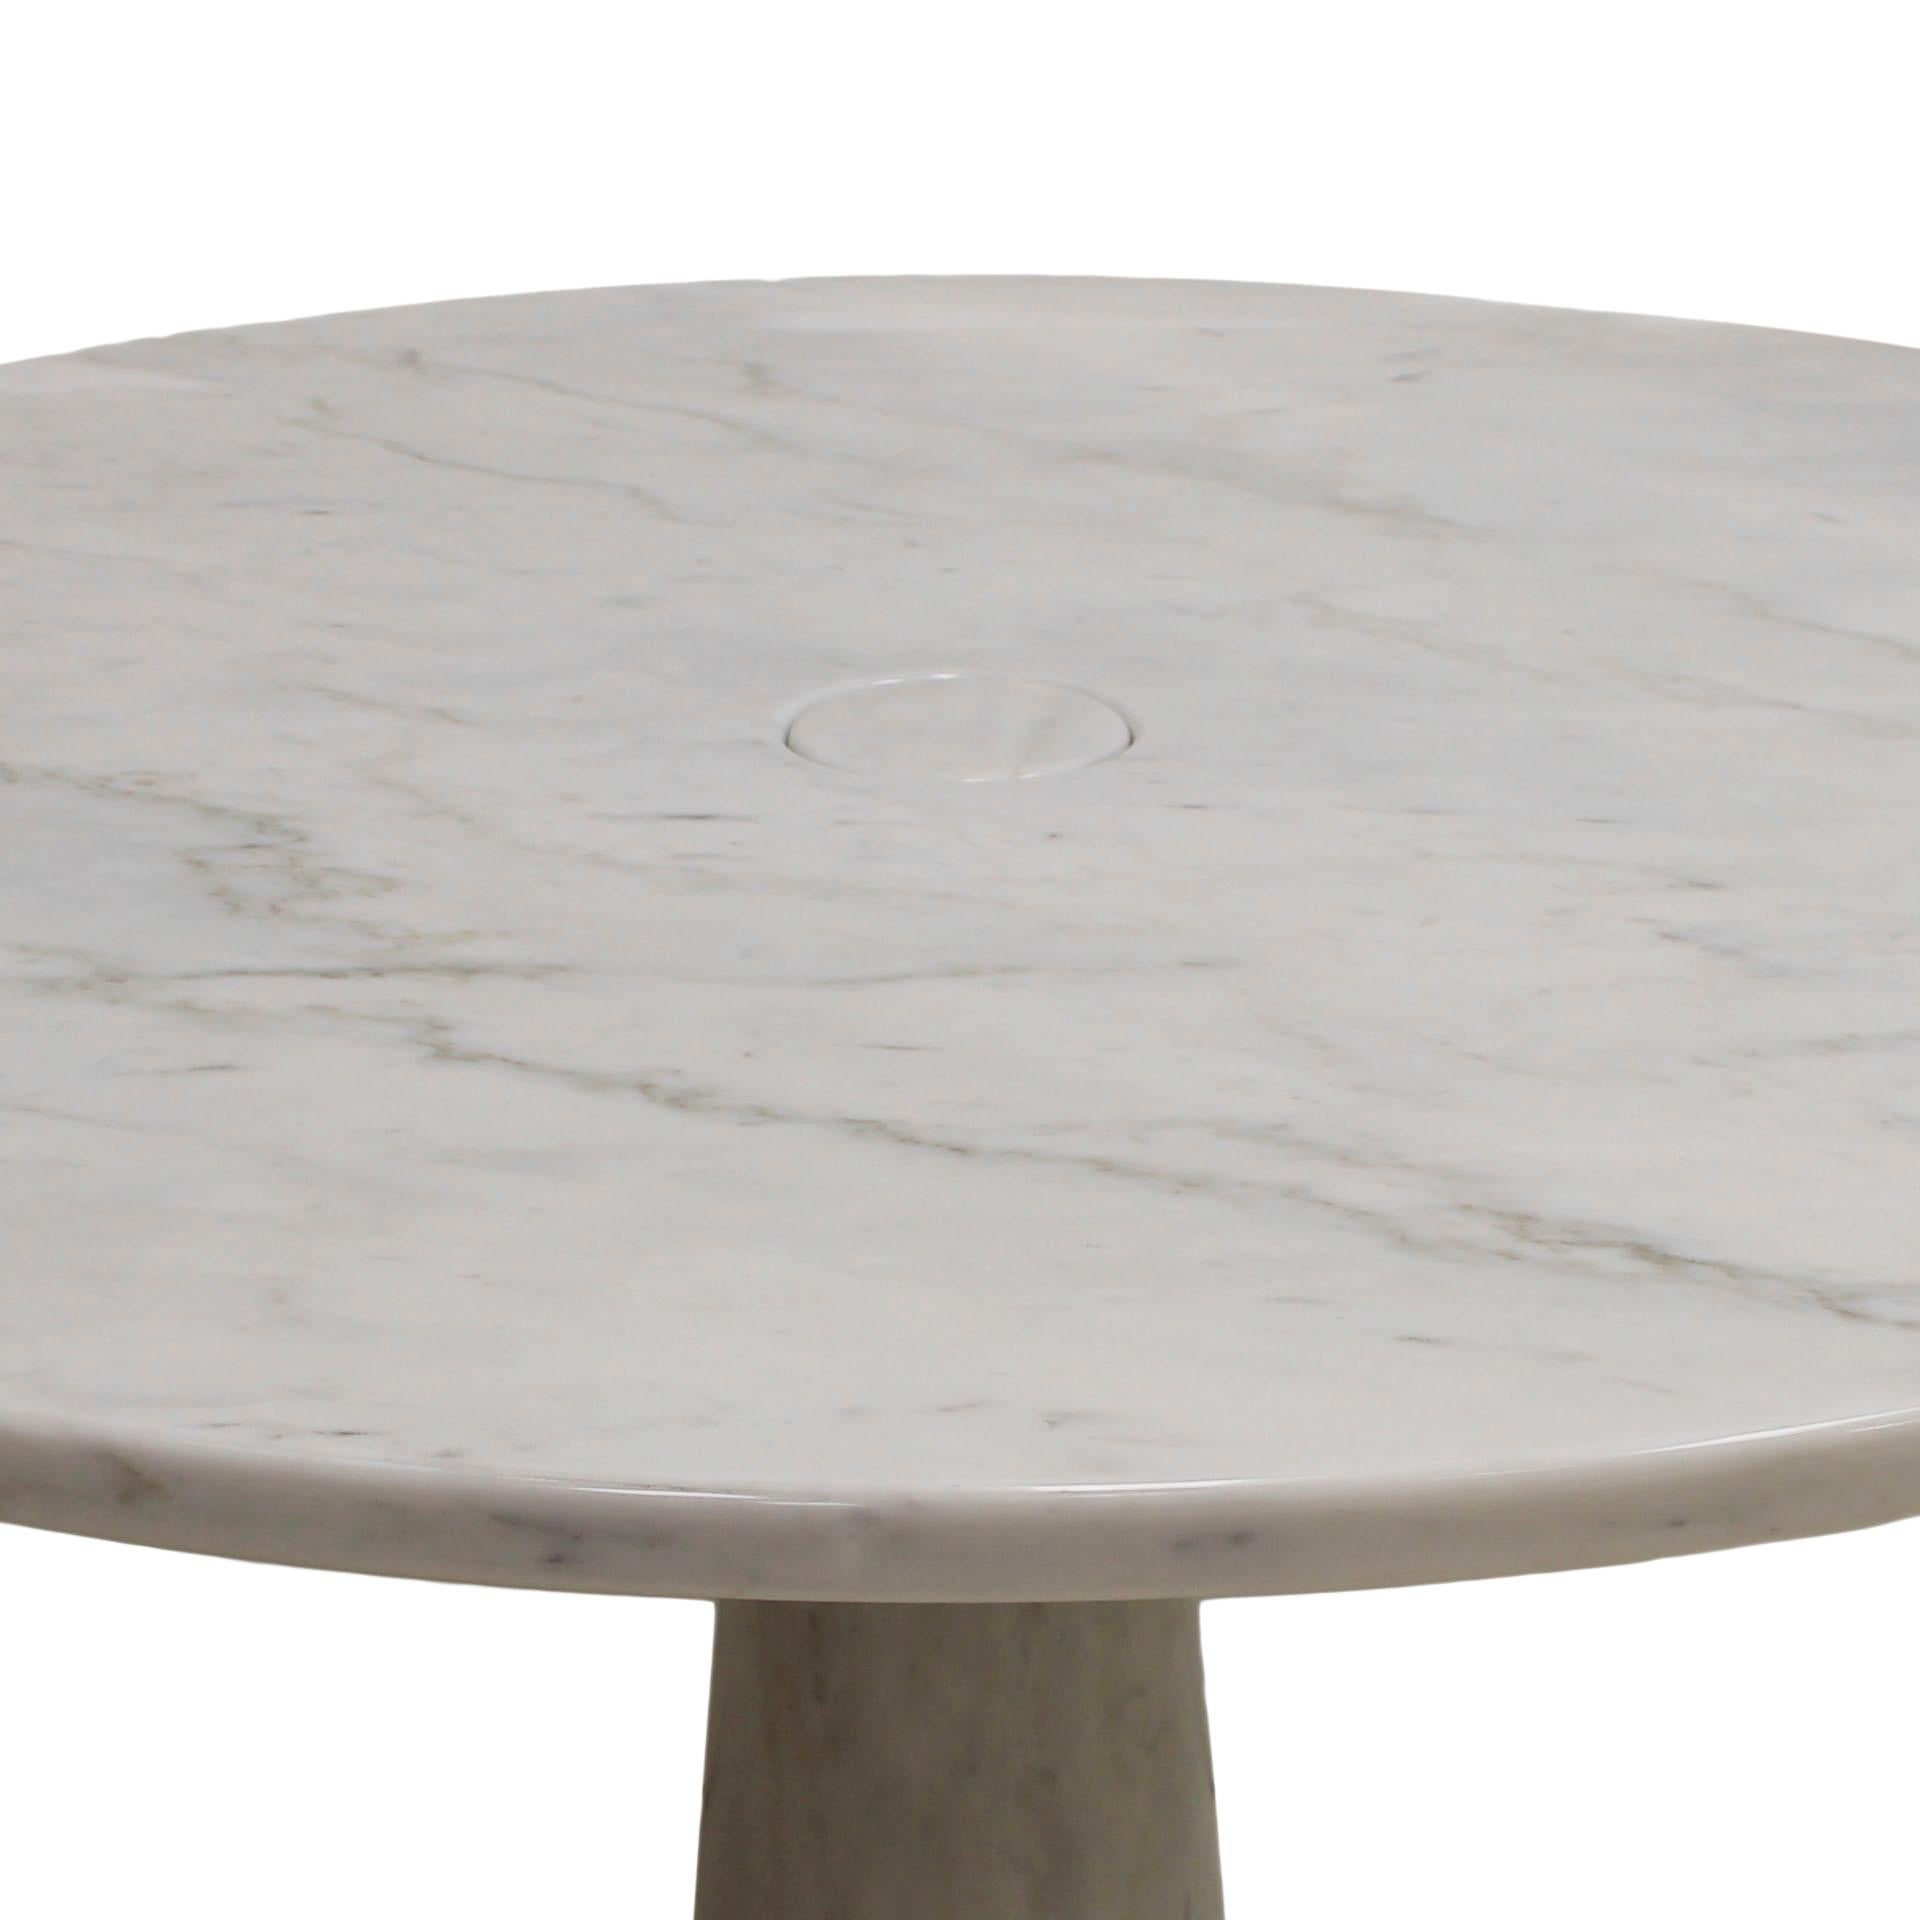 Round table designed by Angelo Mangiarotti for Skipper. Composed of two sculptural pieces made of marble. Italy 1969.

Our main target is customer satisfaction, so we include in the price for this item professional and custom made packing.

Every